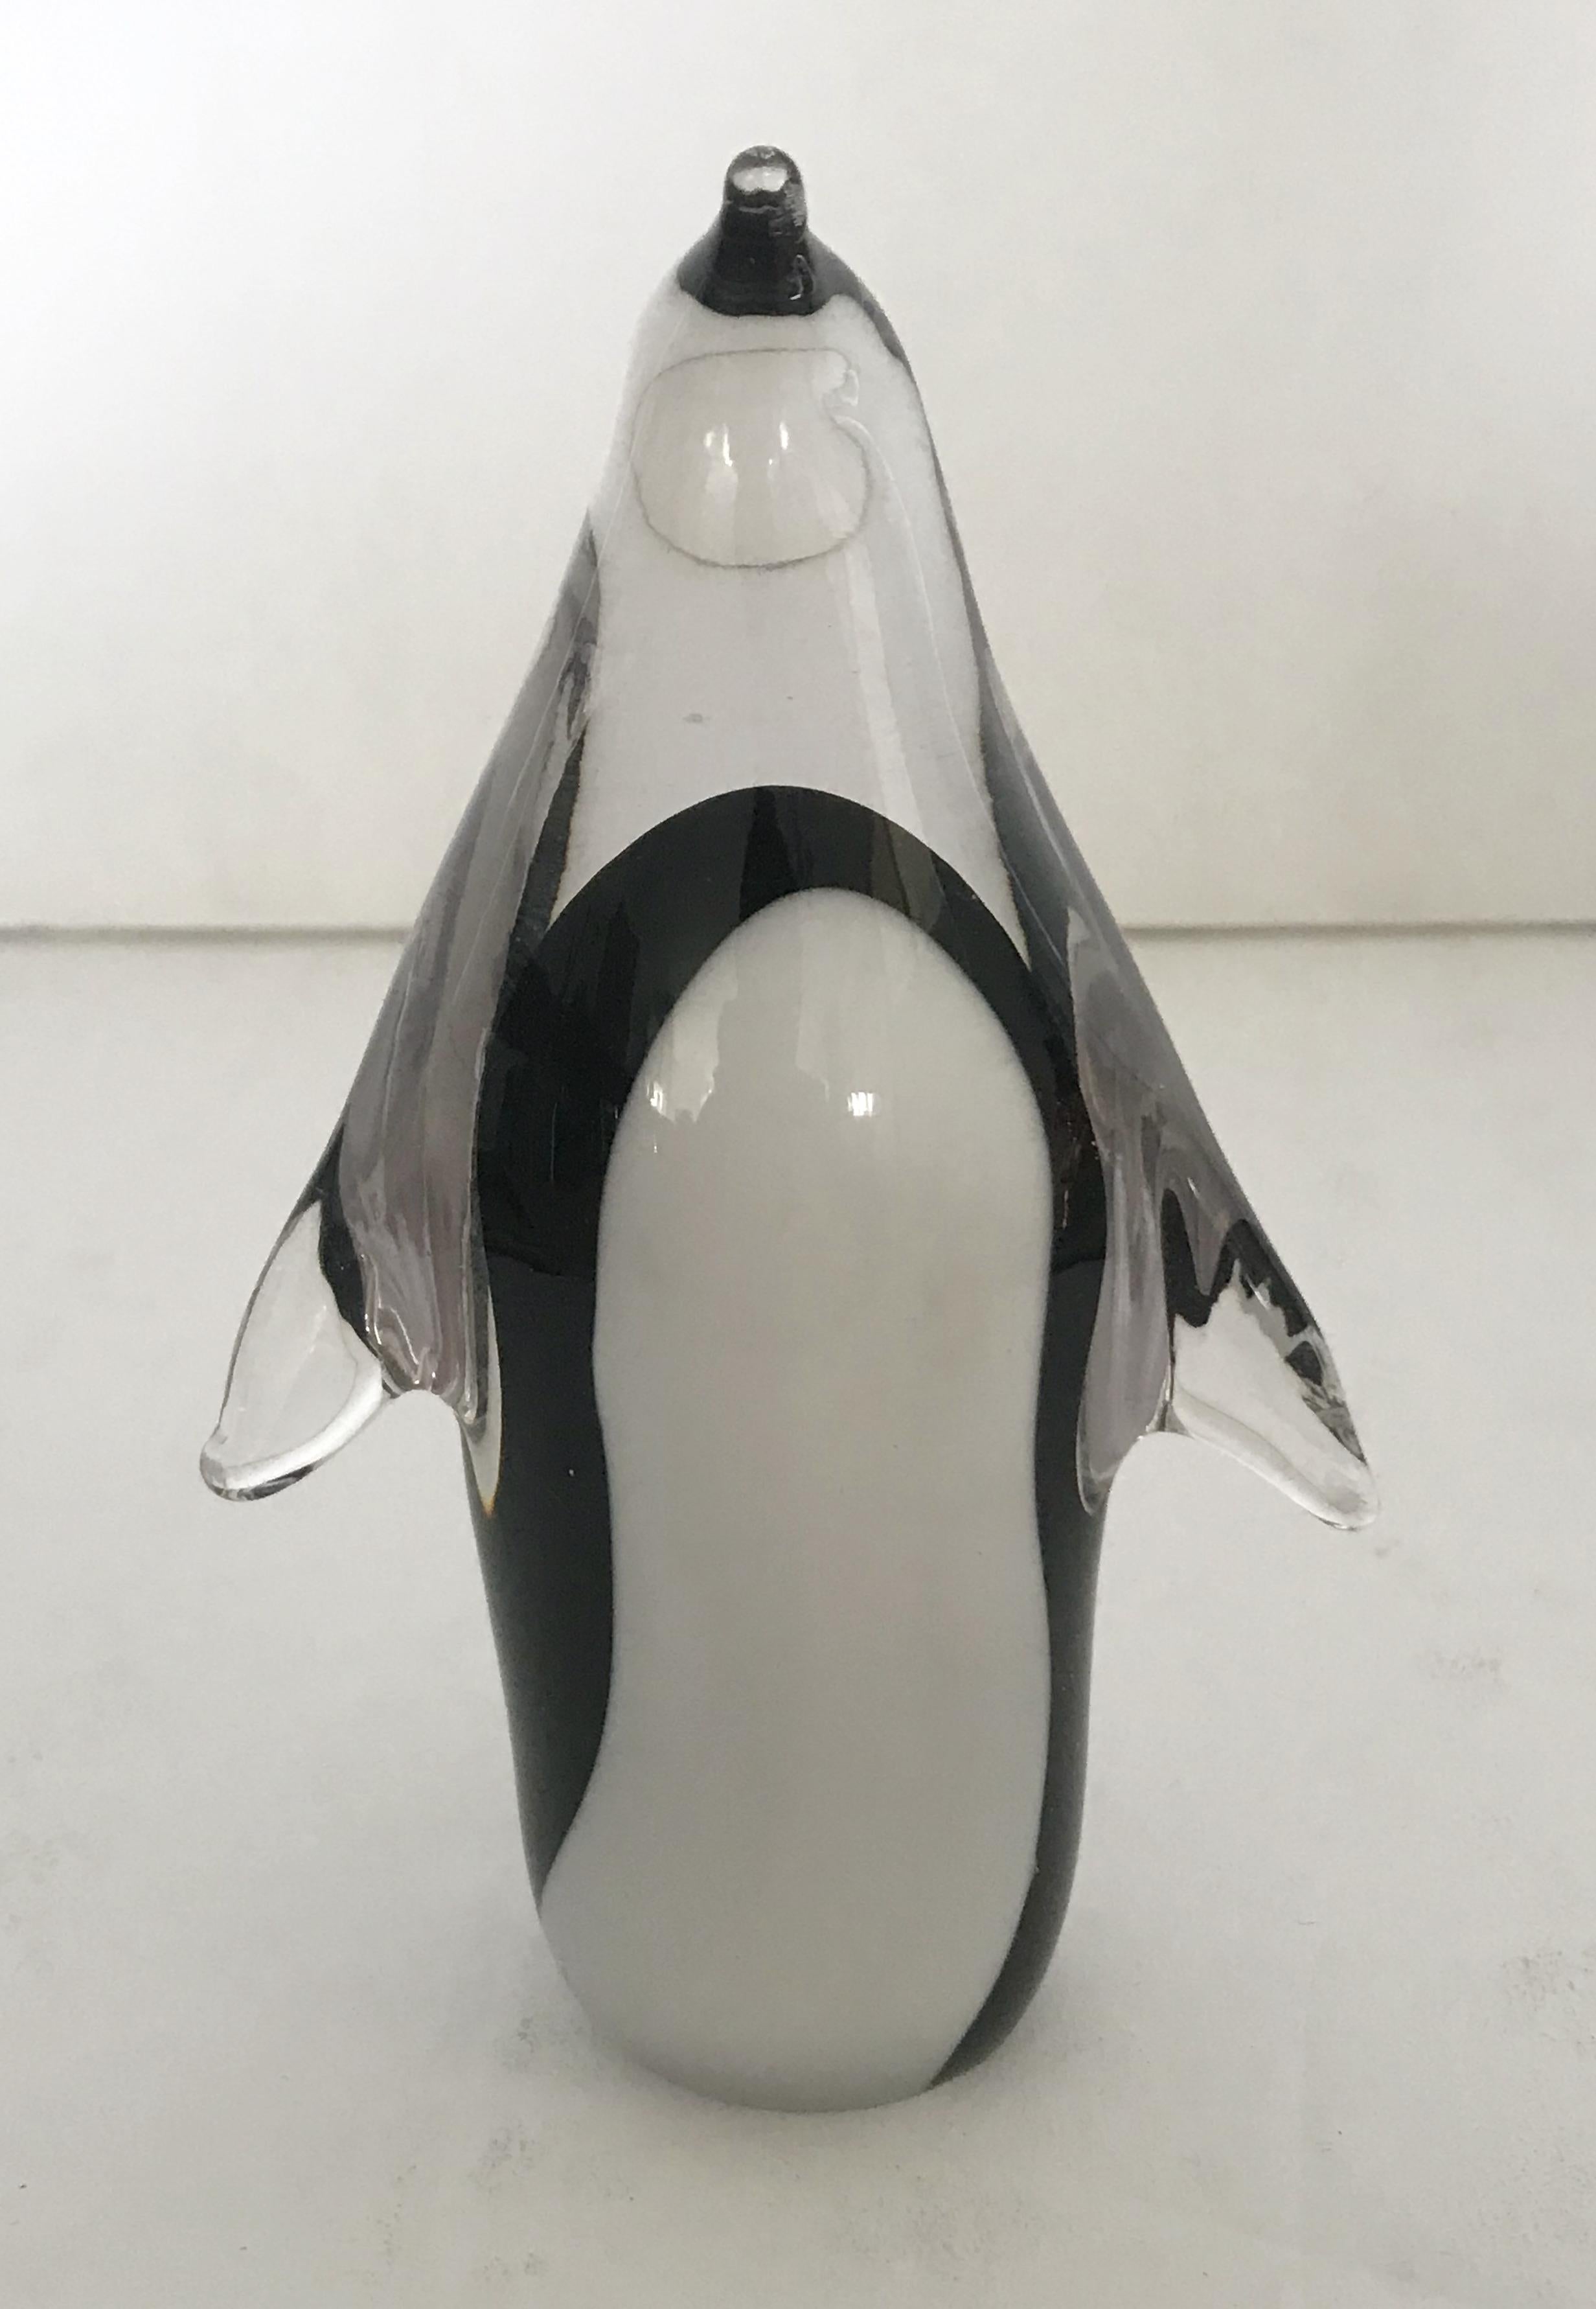 Vintage hand blown Murano glass penguin sculpture in clear, black, and white colors / Made in Italy, circa 1970s
Measures: height 5 inches, width 3 inches, depth 2 inches
1 in stock in Palm Springs ON 50% OFF SALE for $299 !!
Order Reference #: